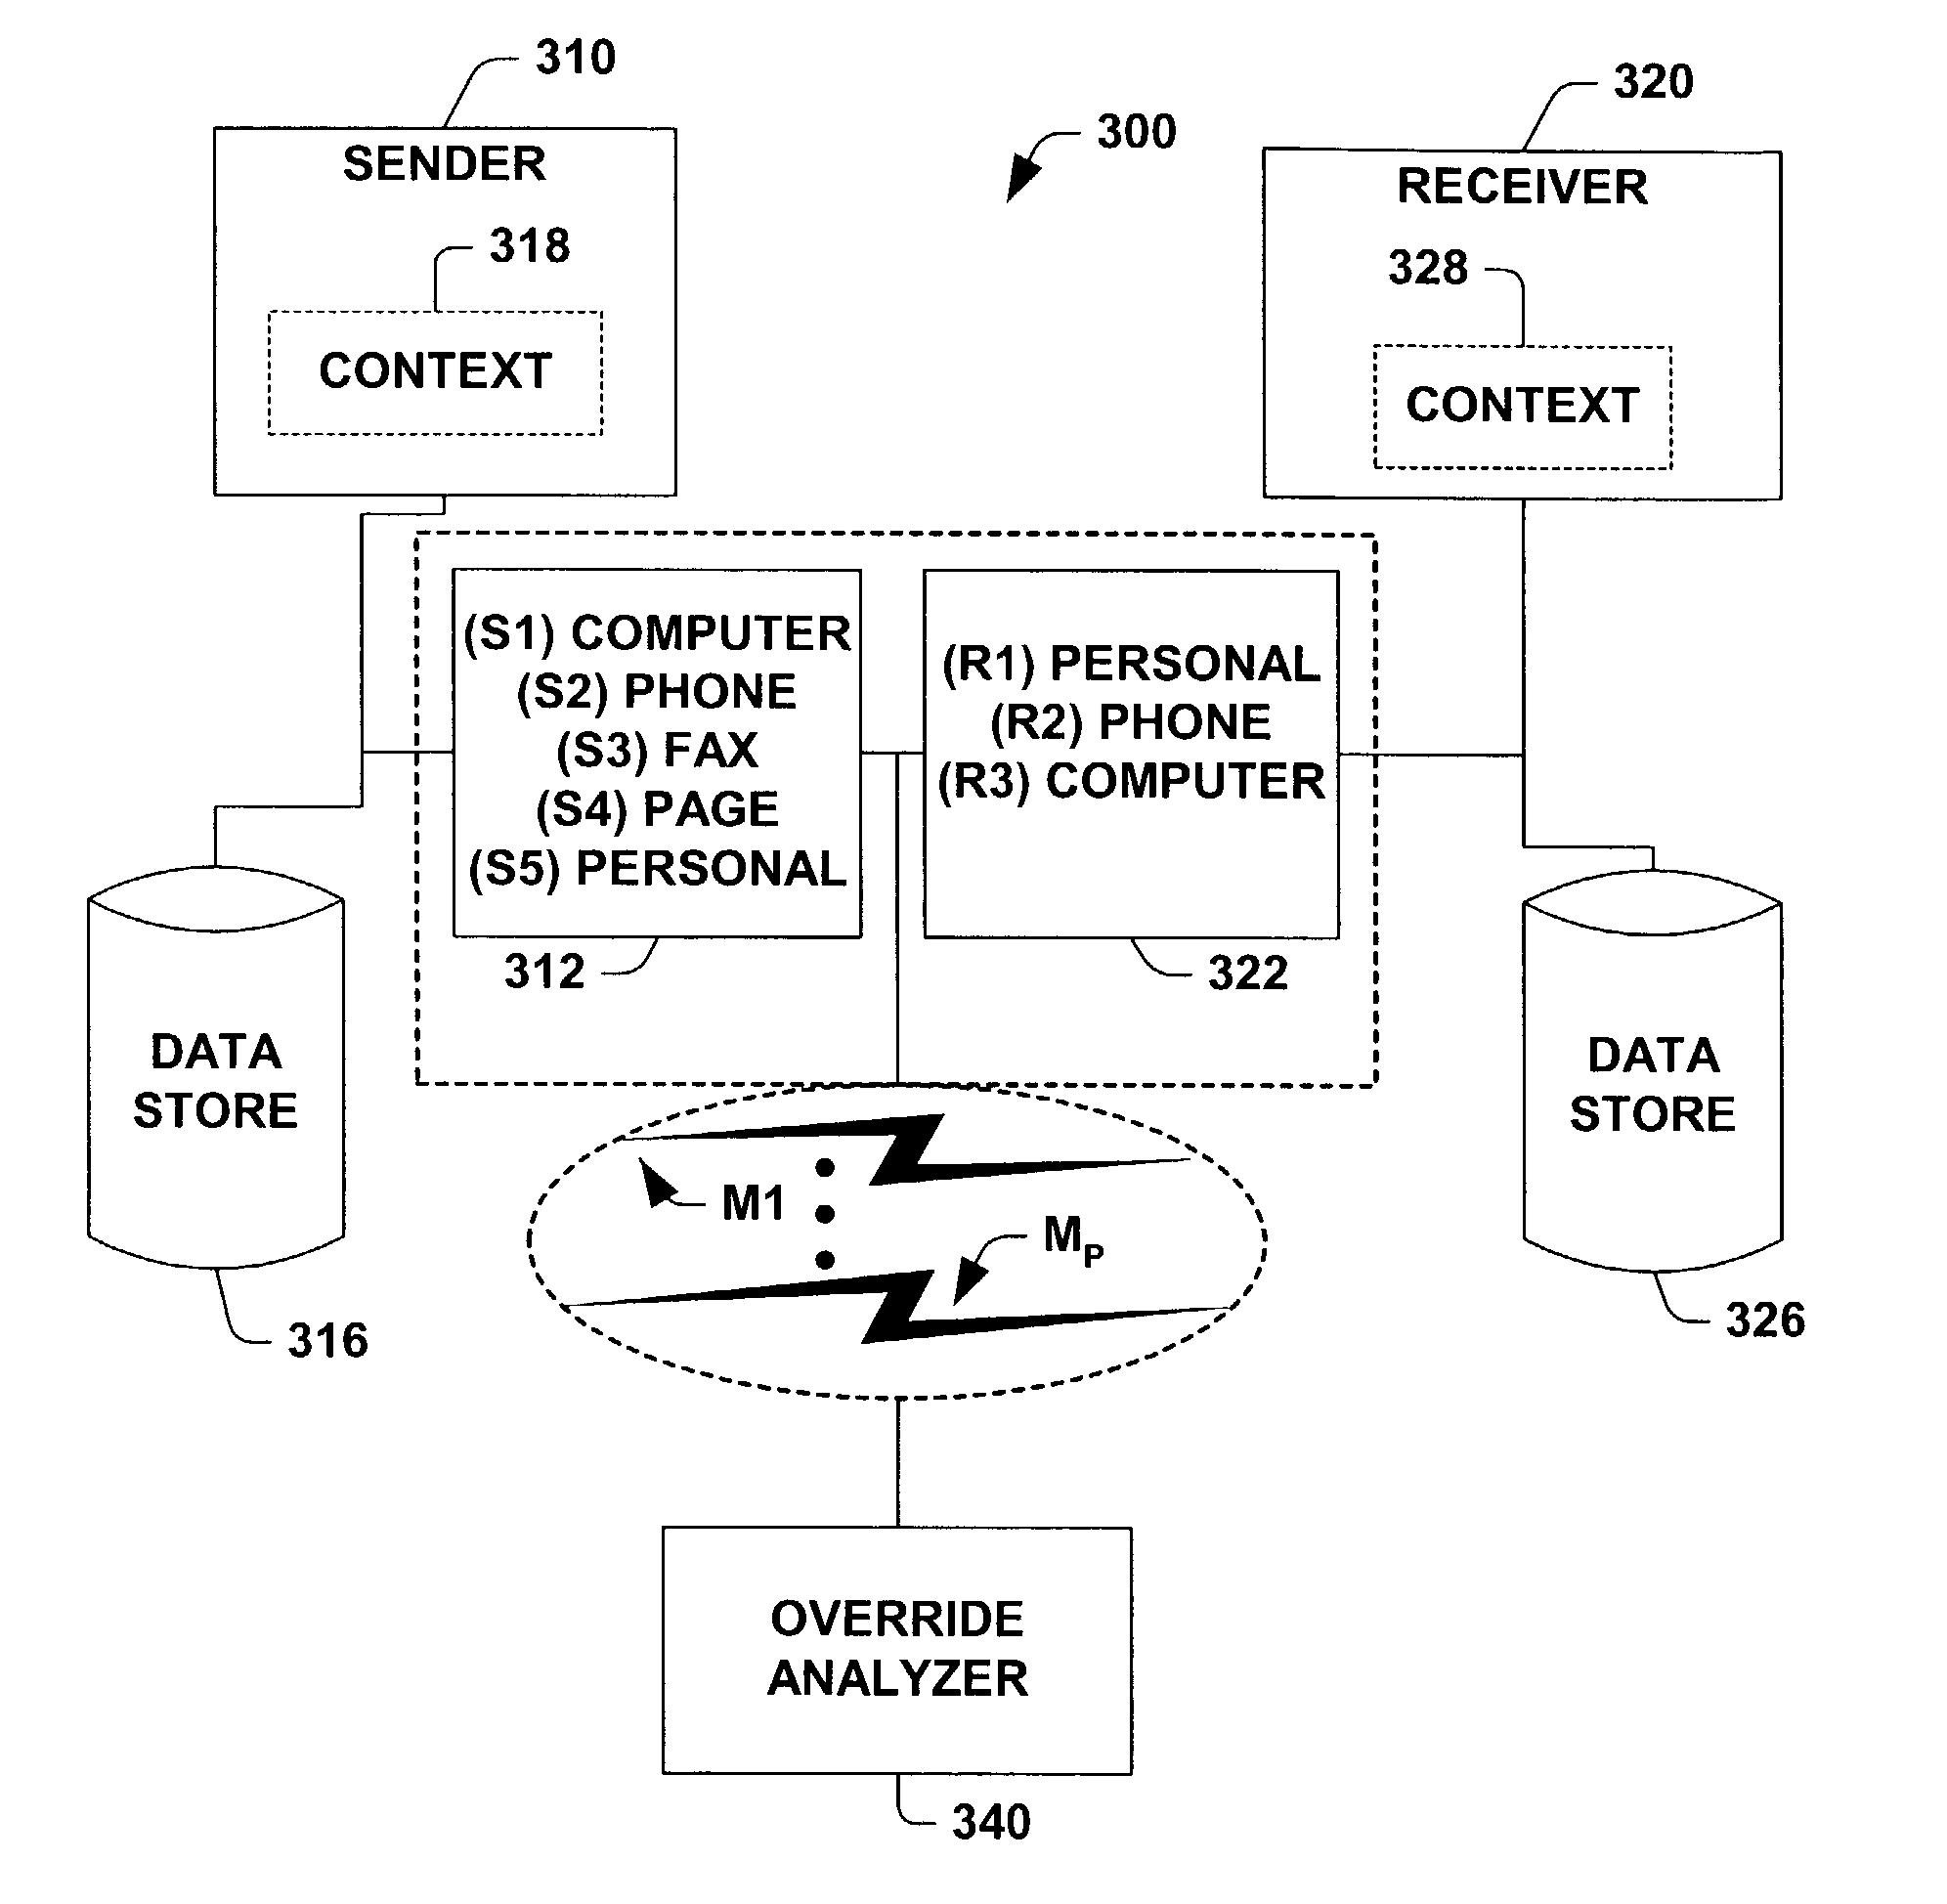 System and methods enabling a mix of human and automated initiatives in the control of communication policies